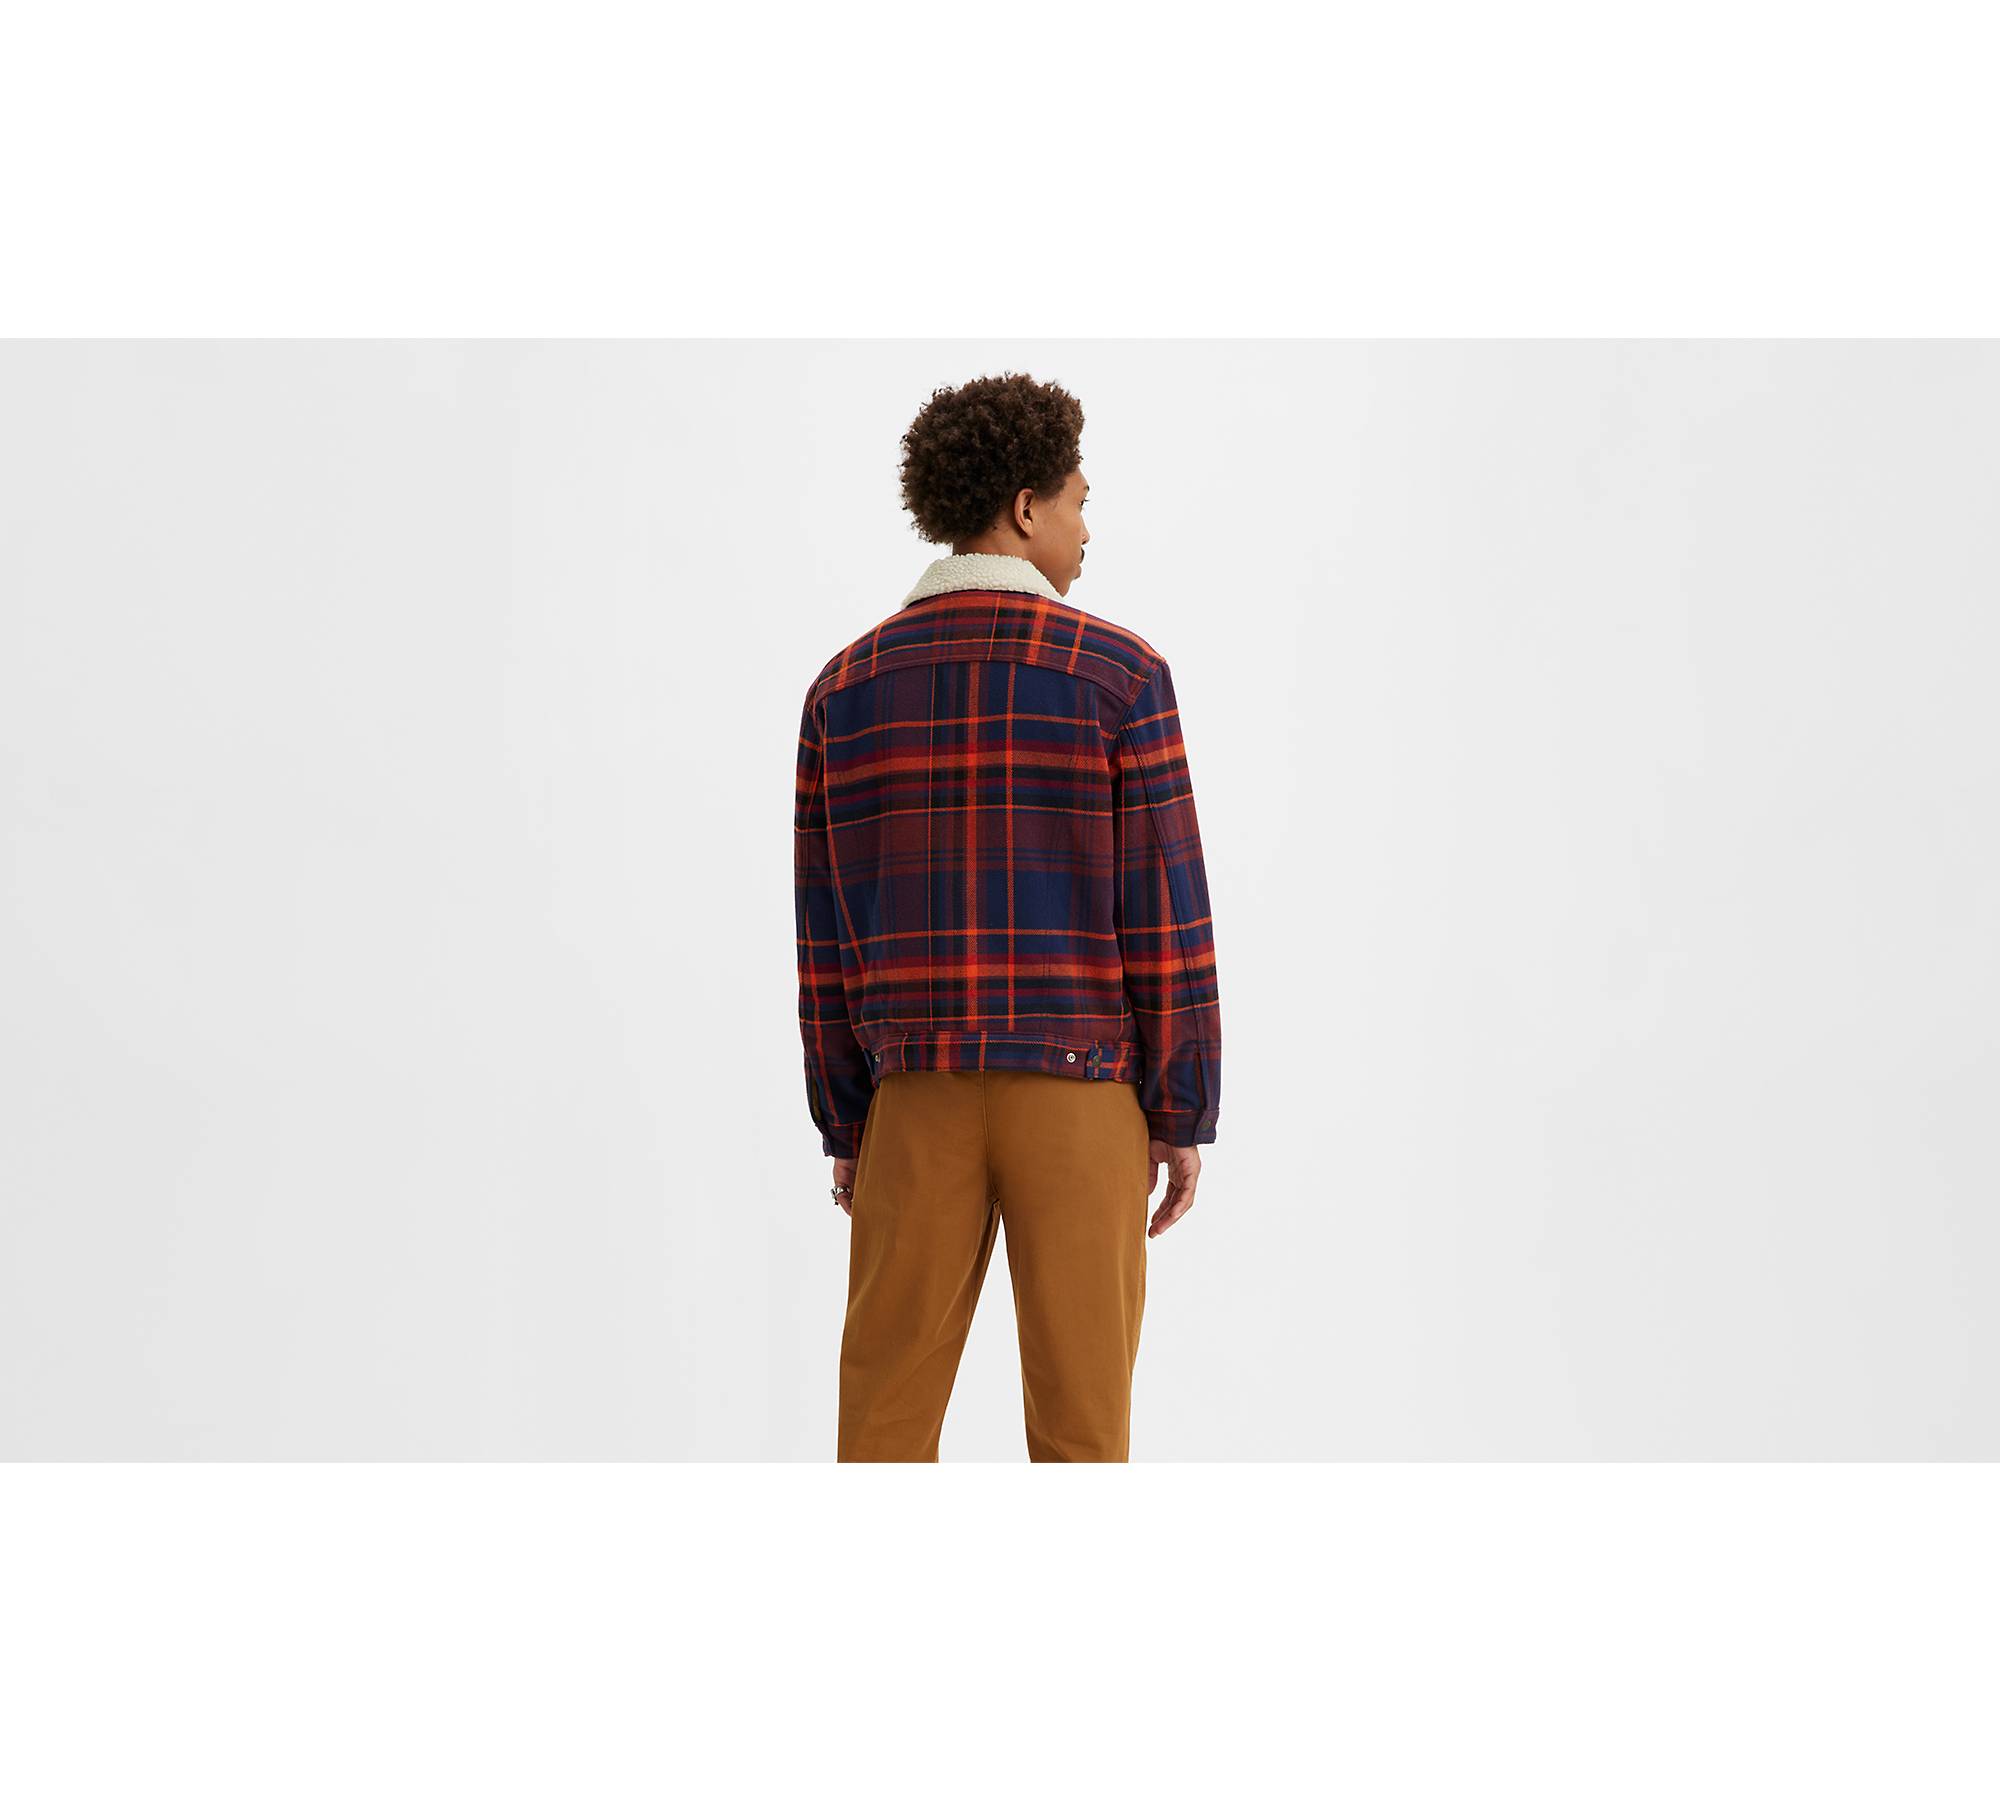 Plaid Vintage Relaxed Fit Trucker Jacket - Multi-color